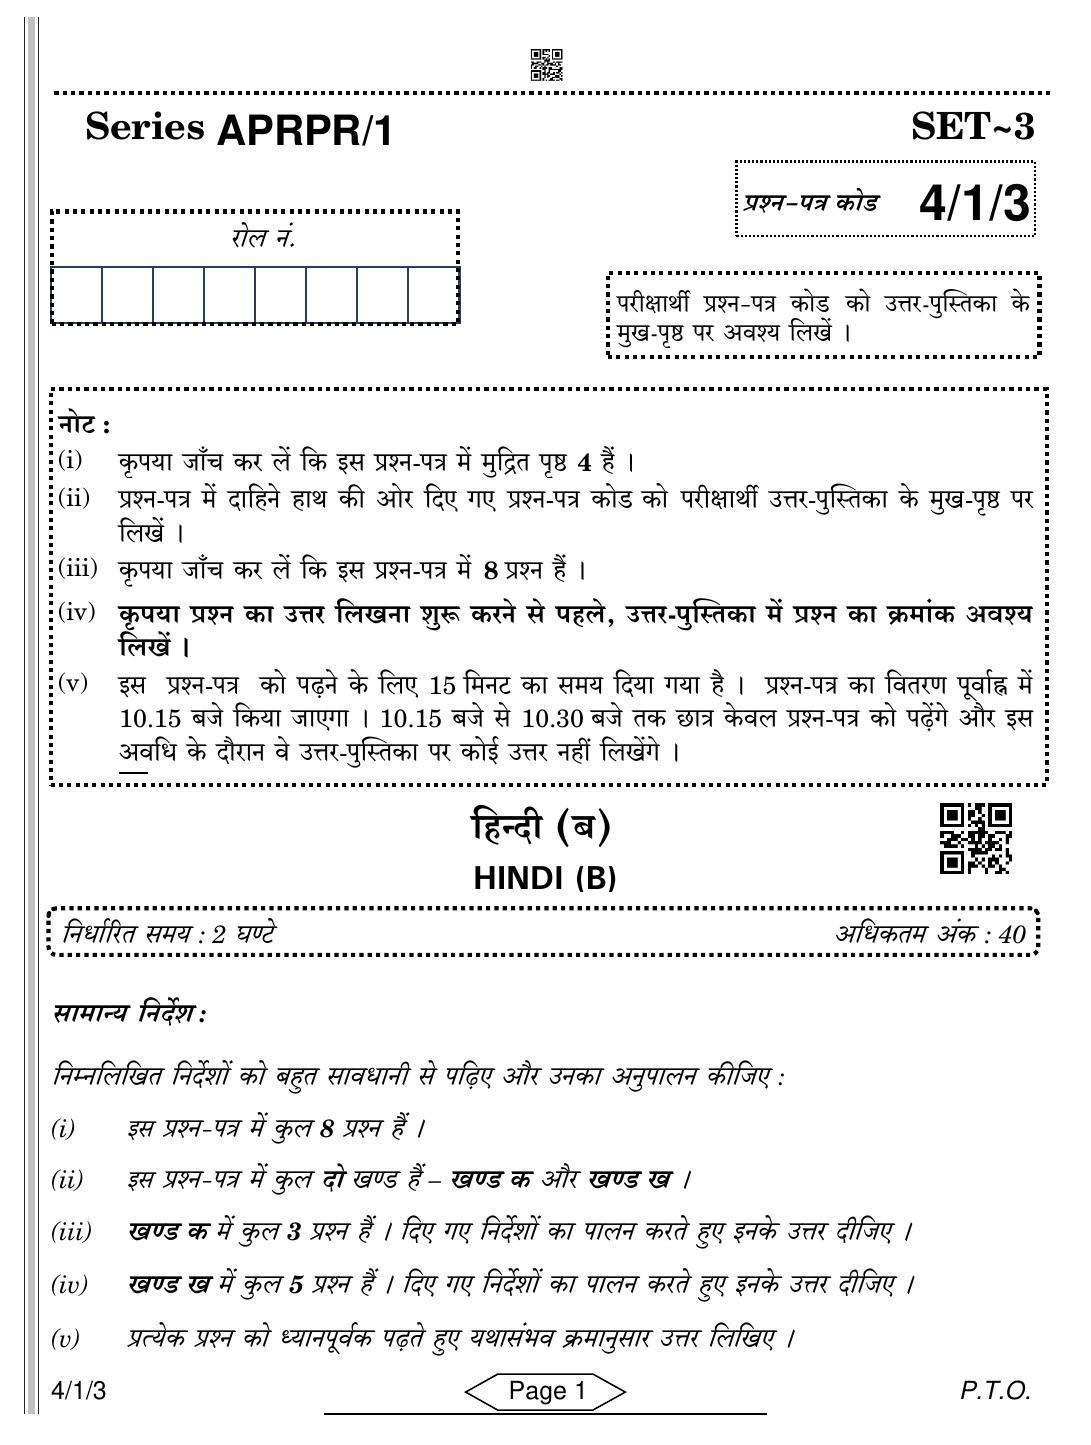 CBSE Class 10 4-1-3 Hindi B 2022 Question Paper - Page 1